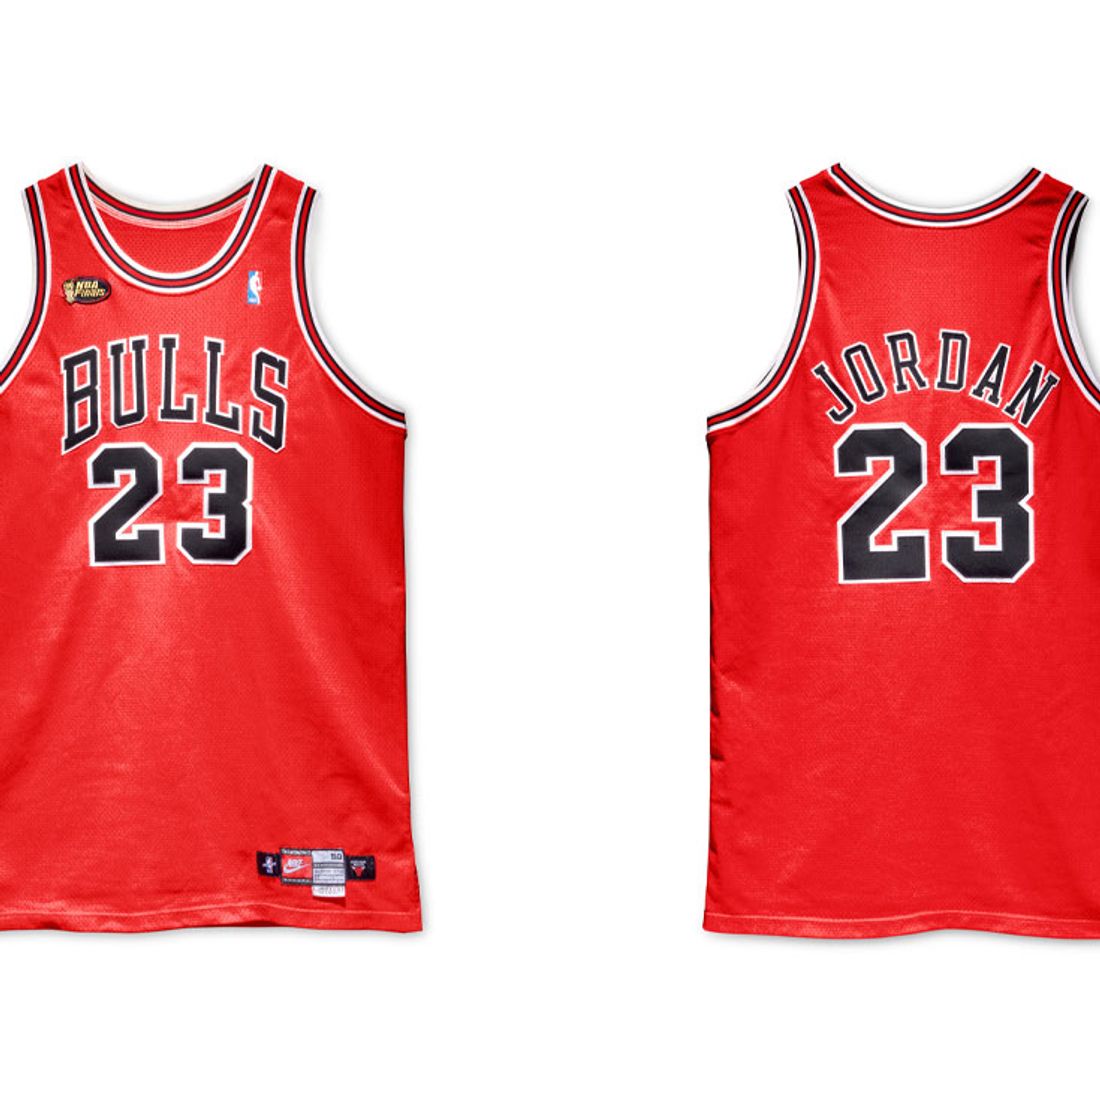 Michael Jordan Jersey From 1998 NBA Finals Sells for a Record $10.1M